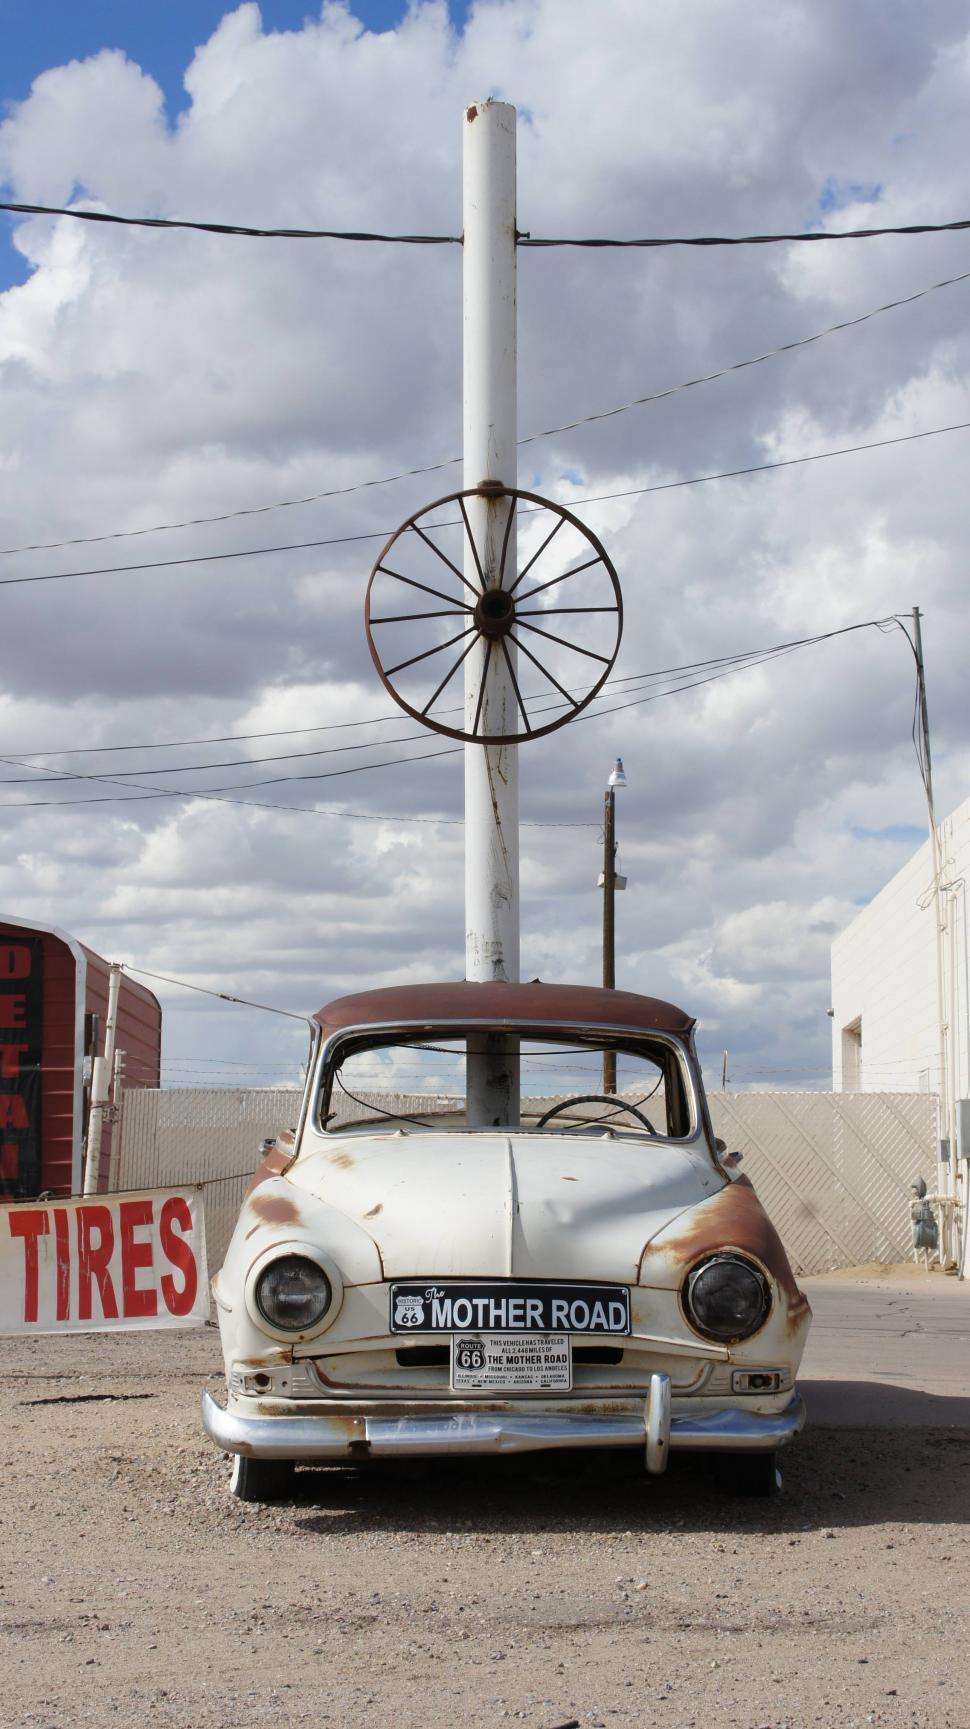 Free Image of Route 66 Abandoned Car 